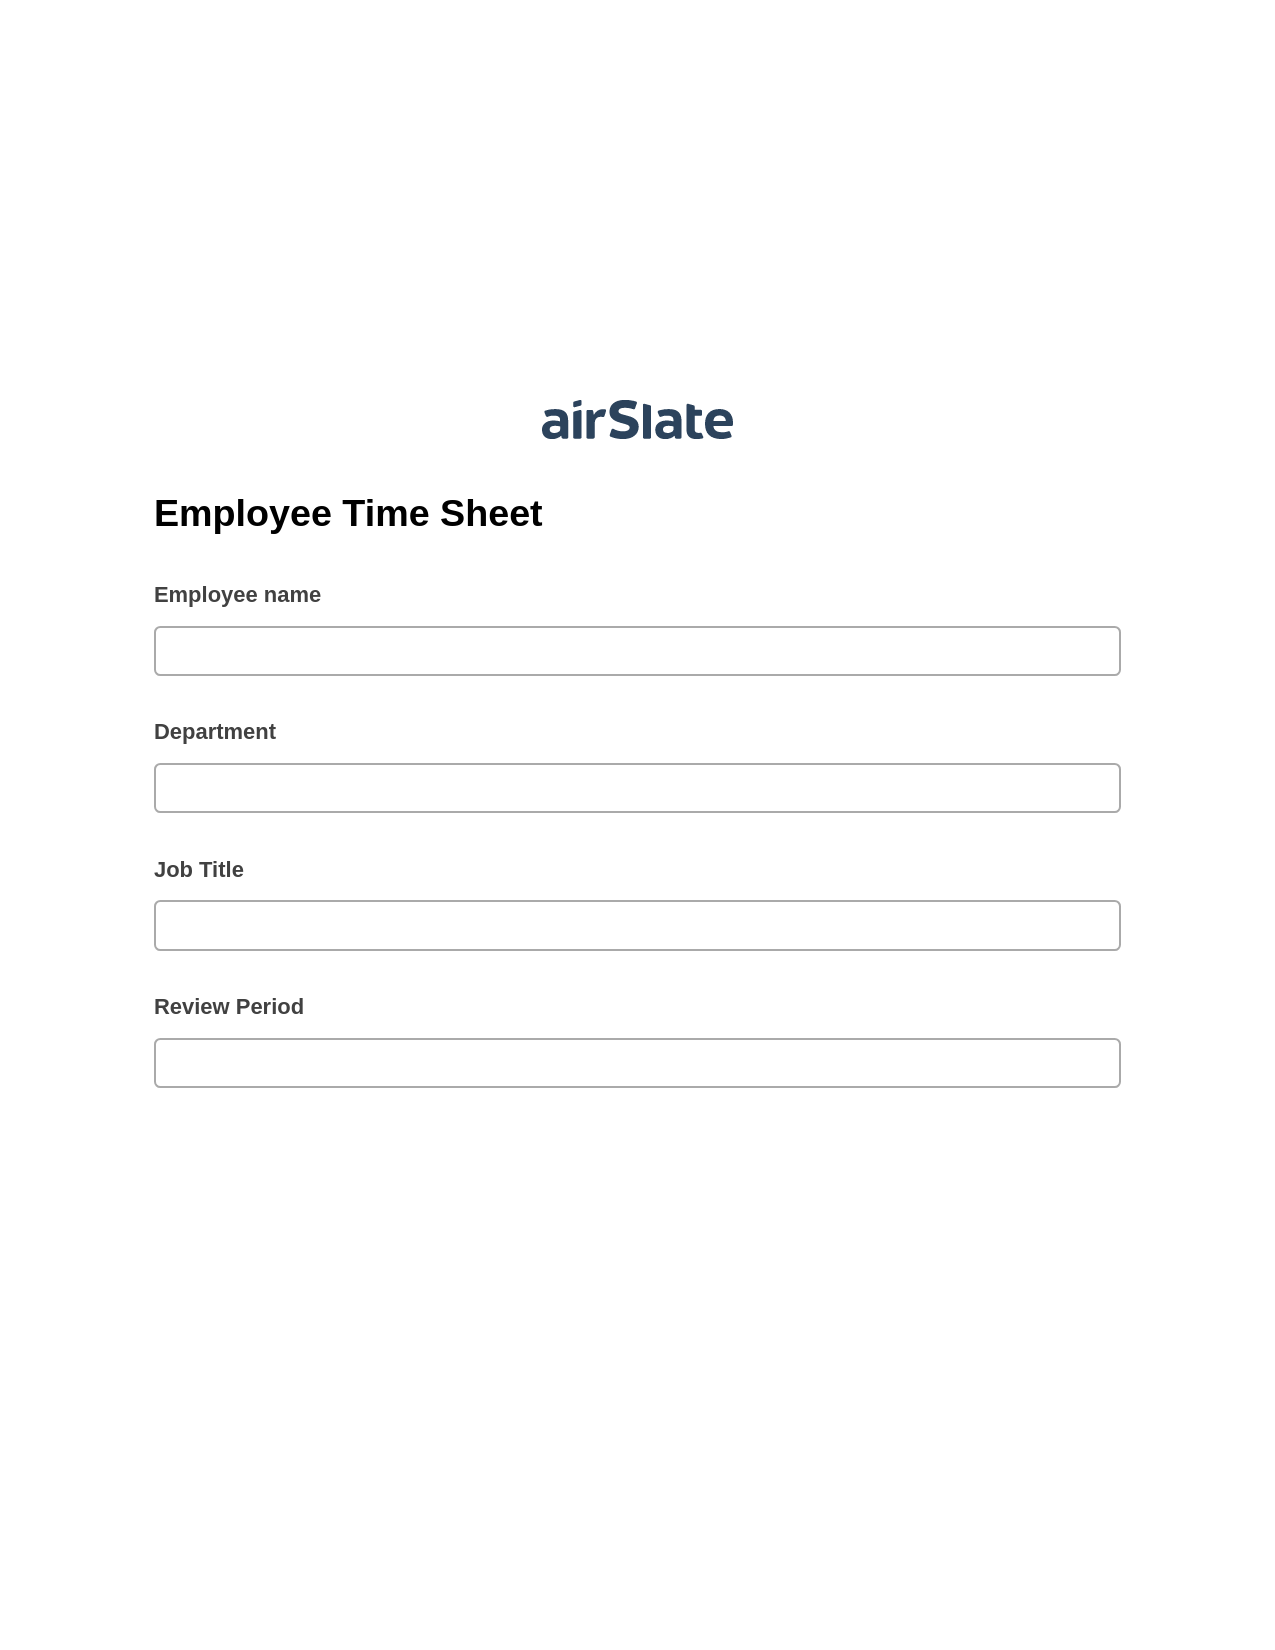 Employee Time Sheet Pre-fill from Excel Spreadsheet Bot, Assign Roles to Recipients Bot, Archive to Dropbox Bot